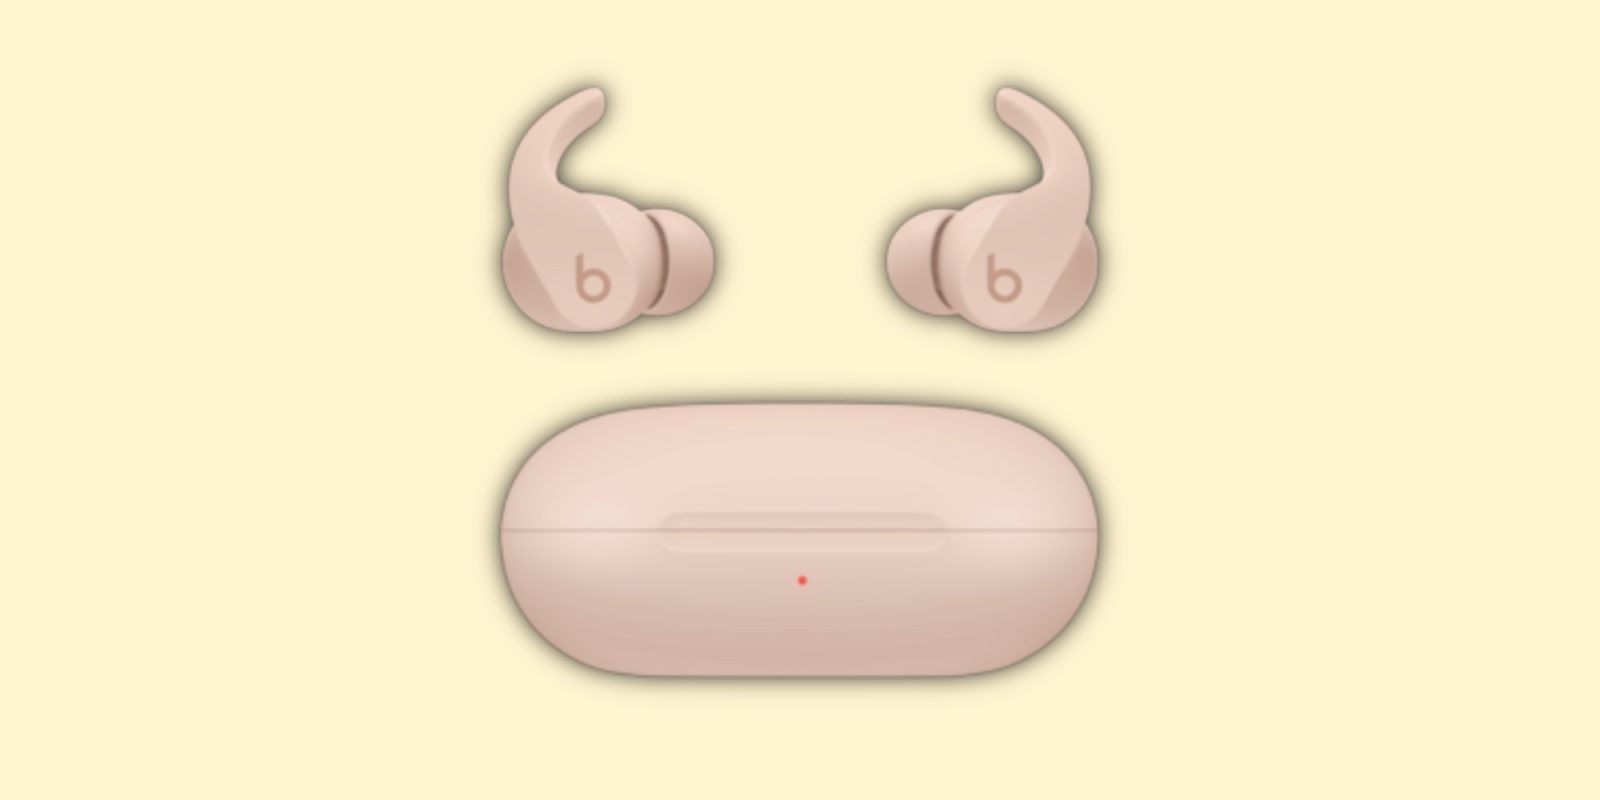 unreleased-beats-fit-pro-9to5mac